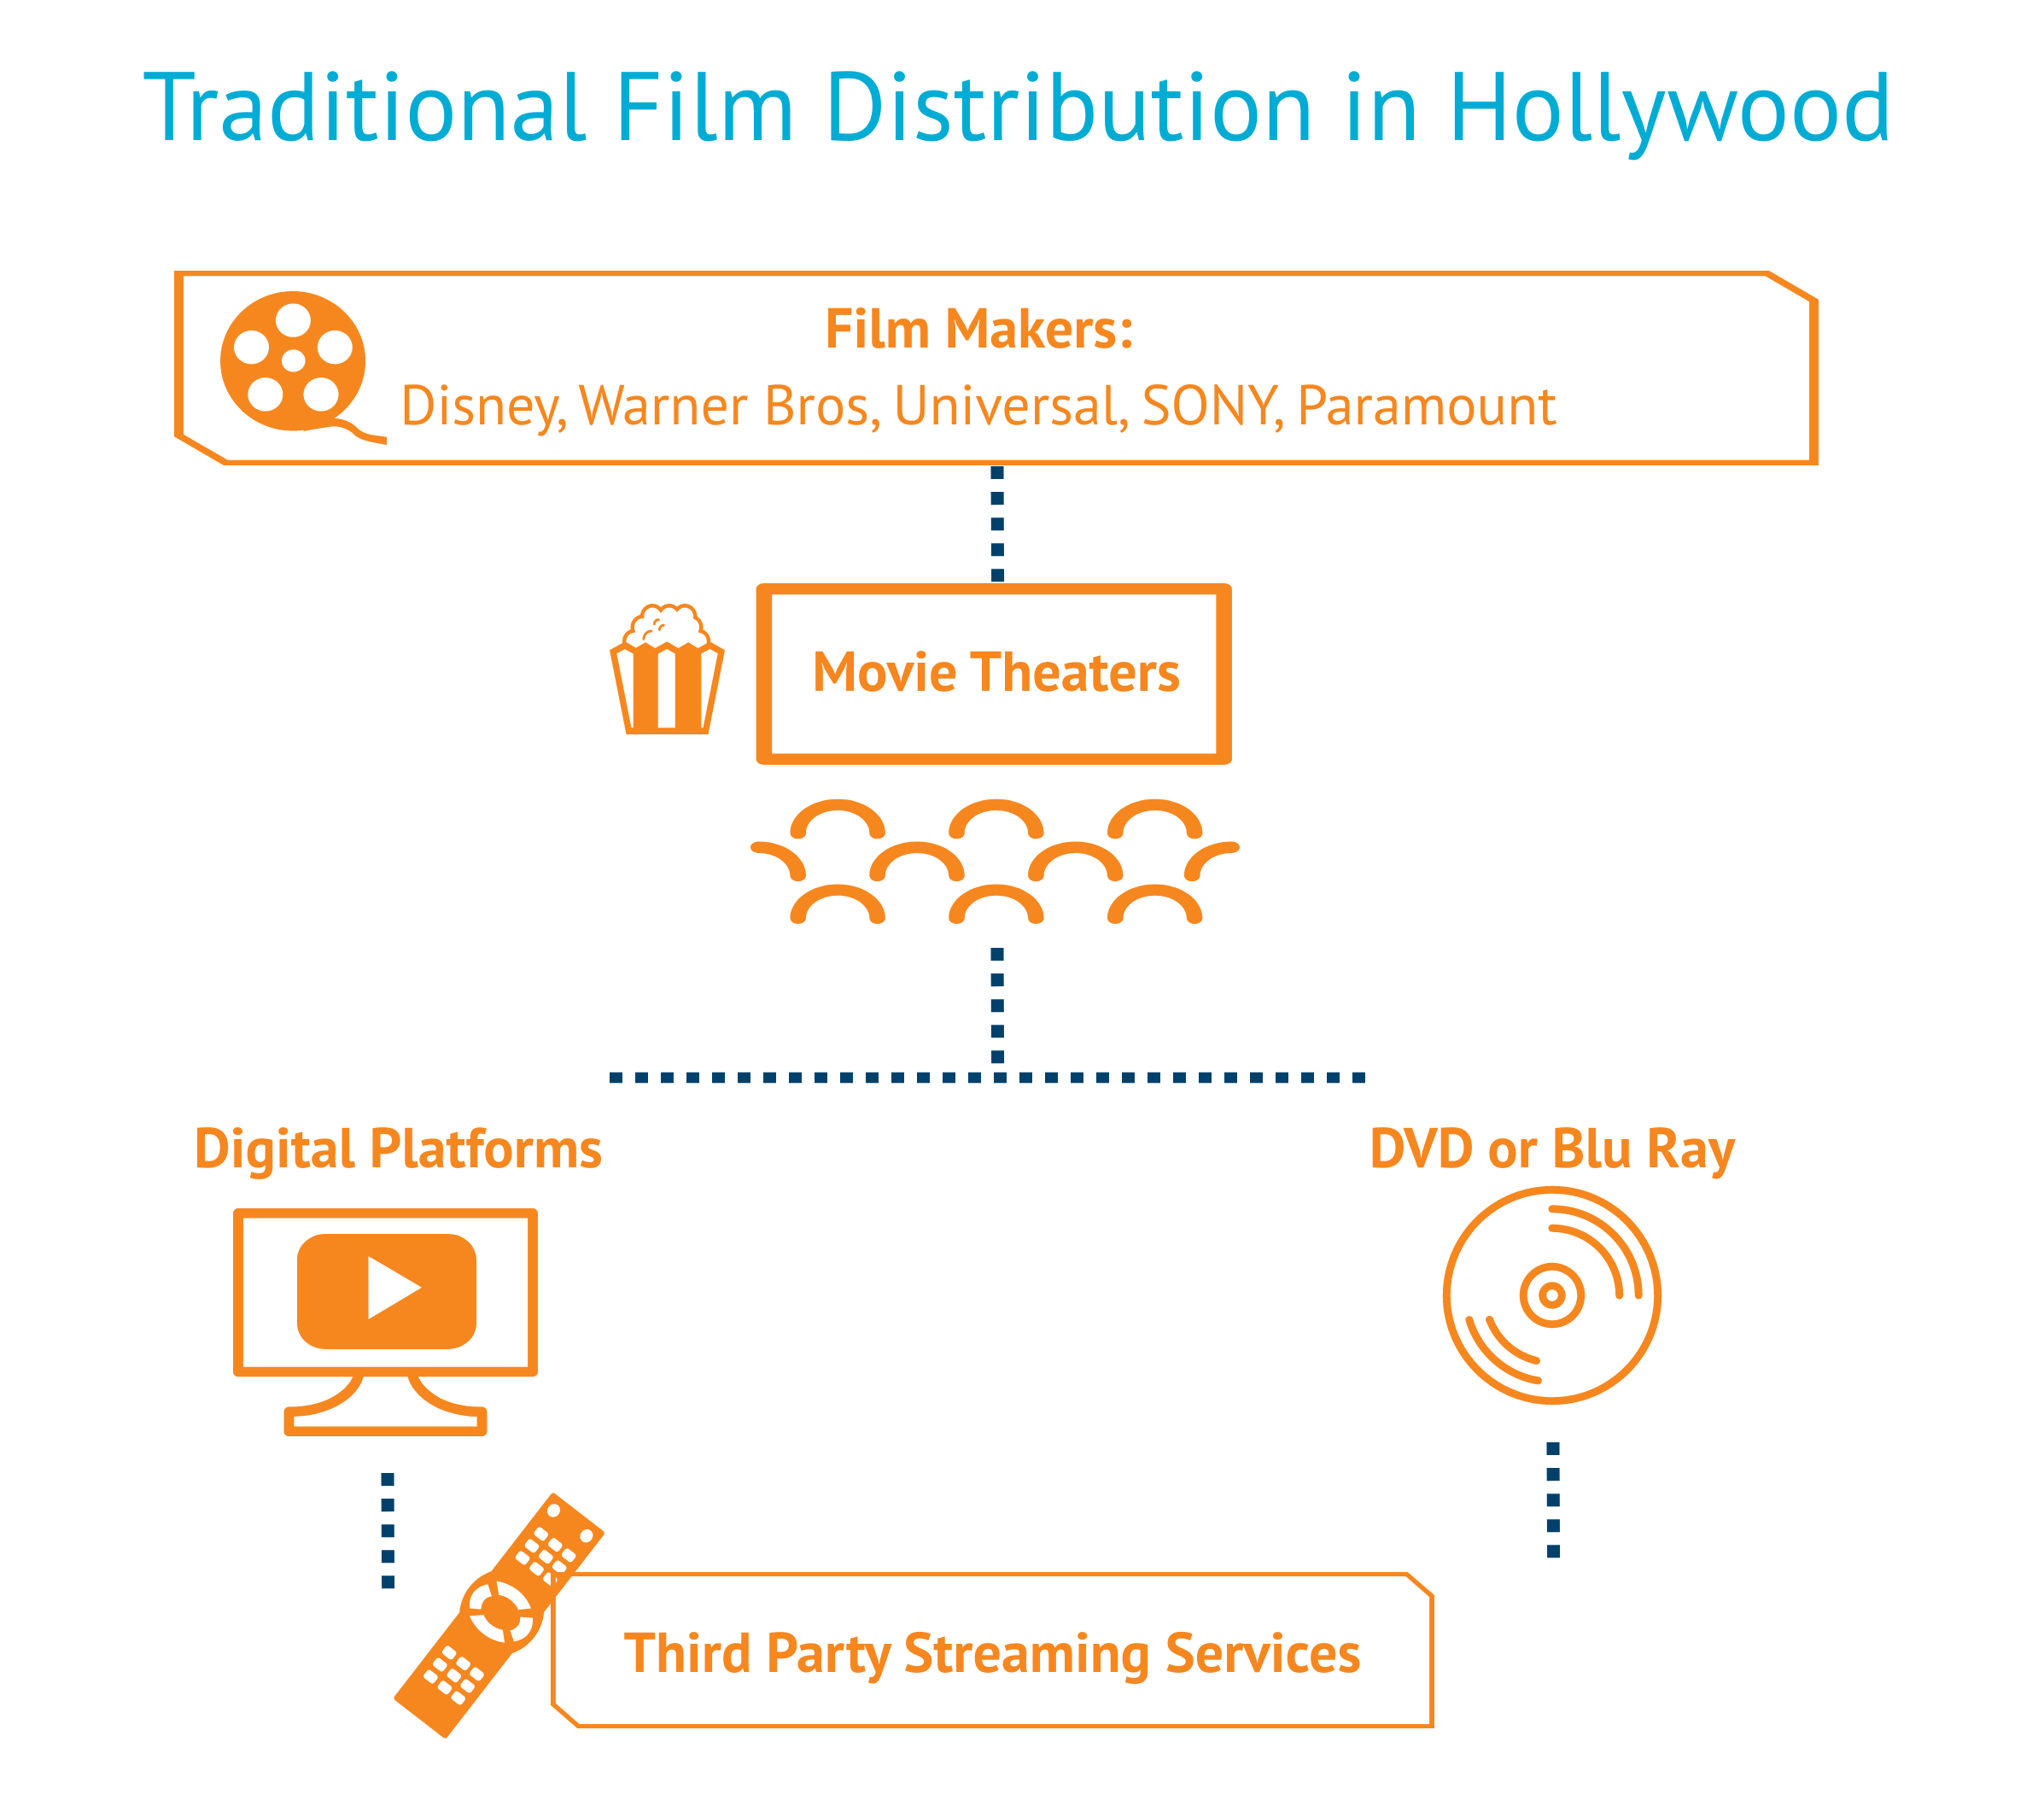 Film Distribution in Hollywood